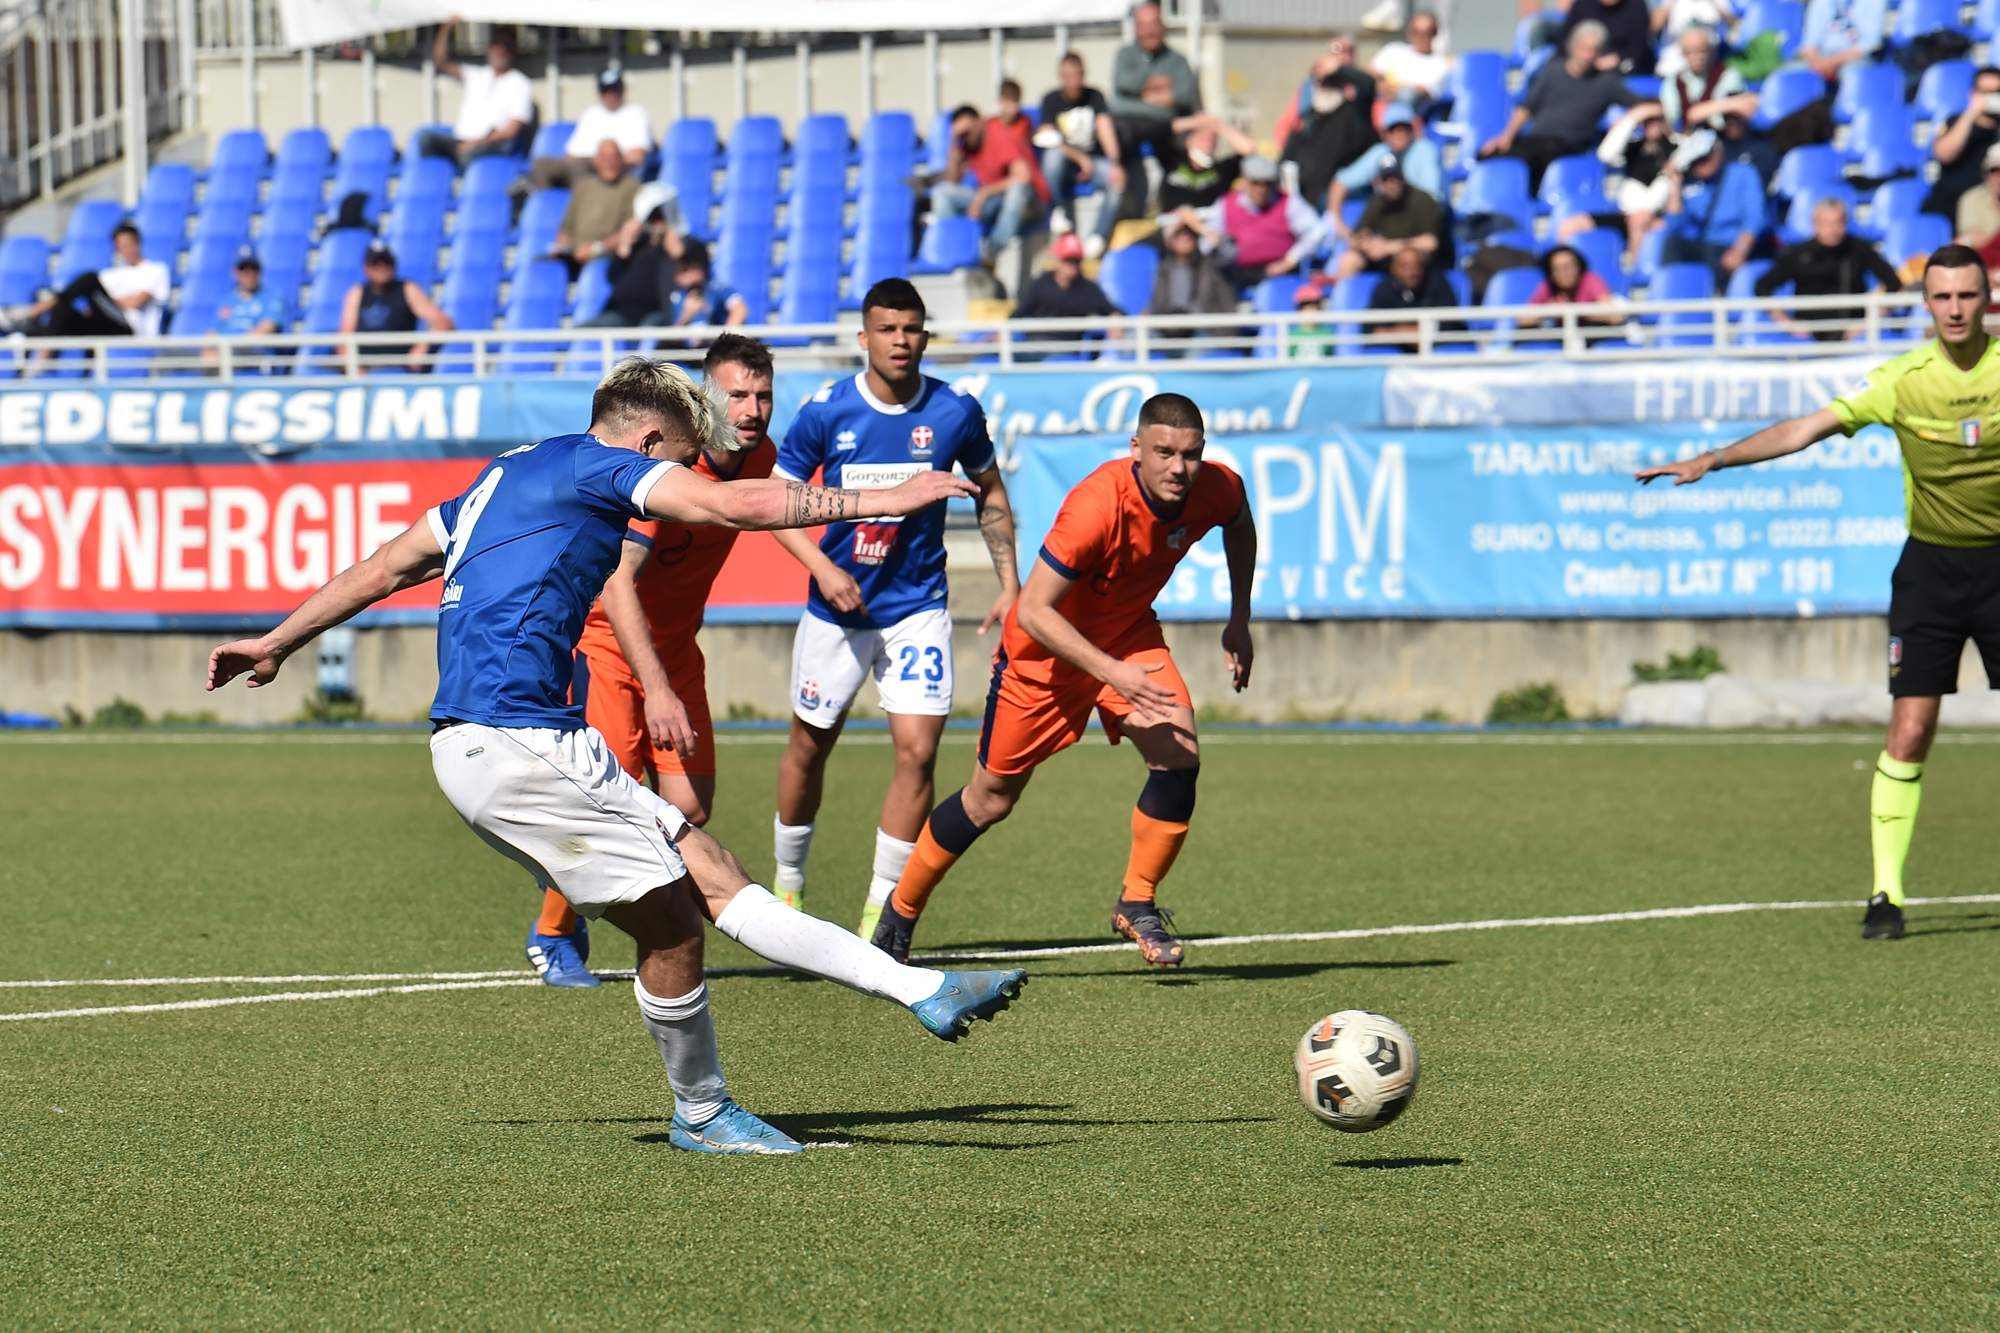 Read more about the article Novara-PDHAE 3-0 | Tabellino del match